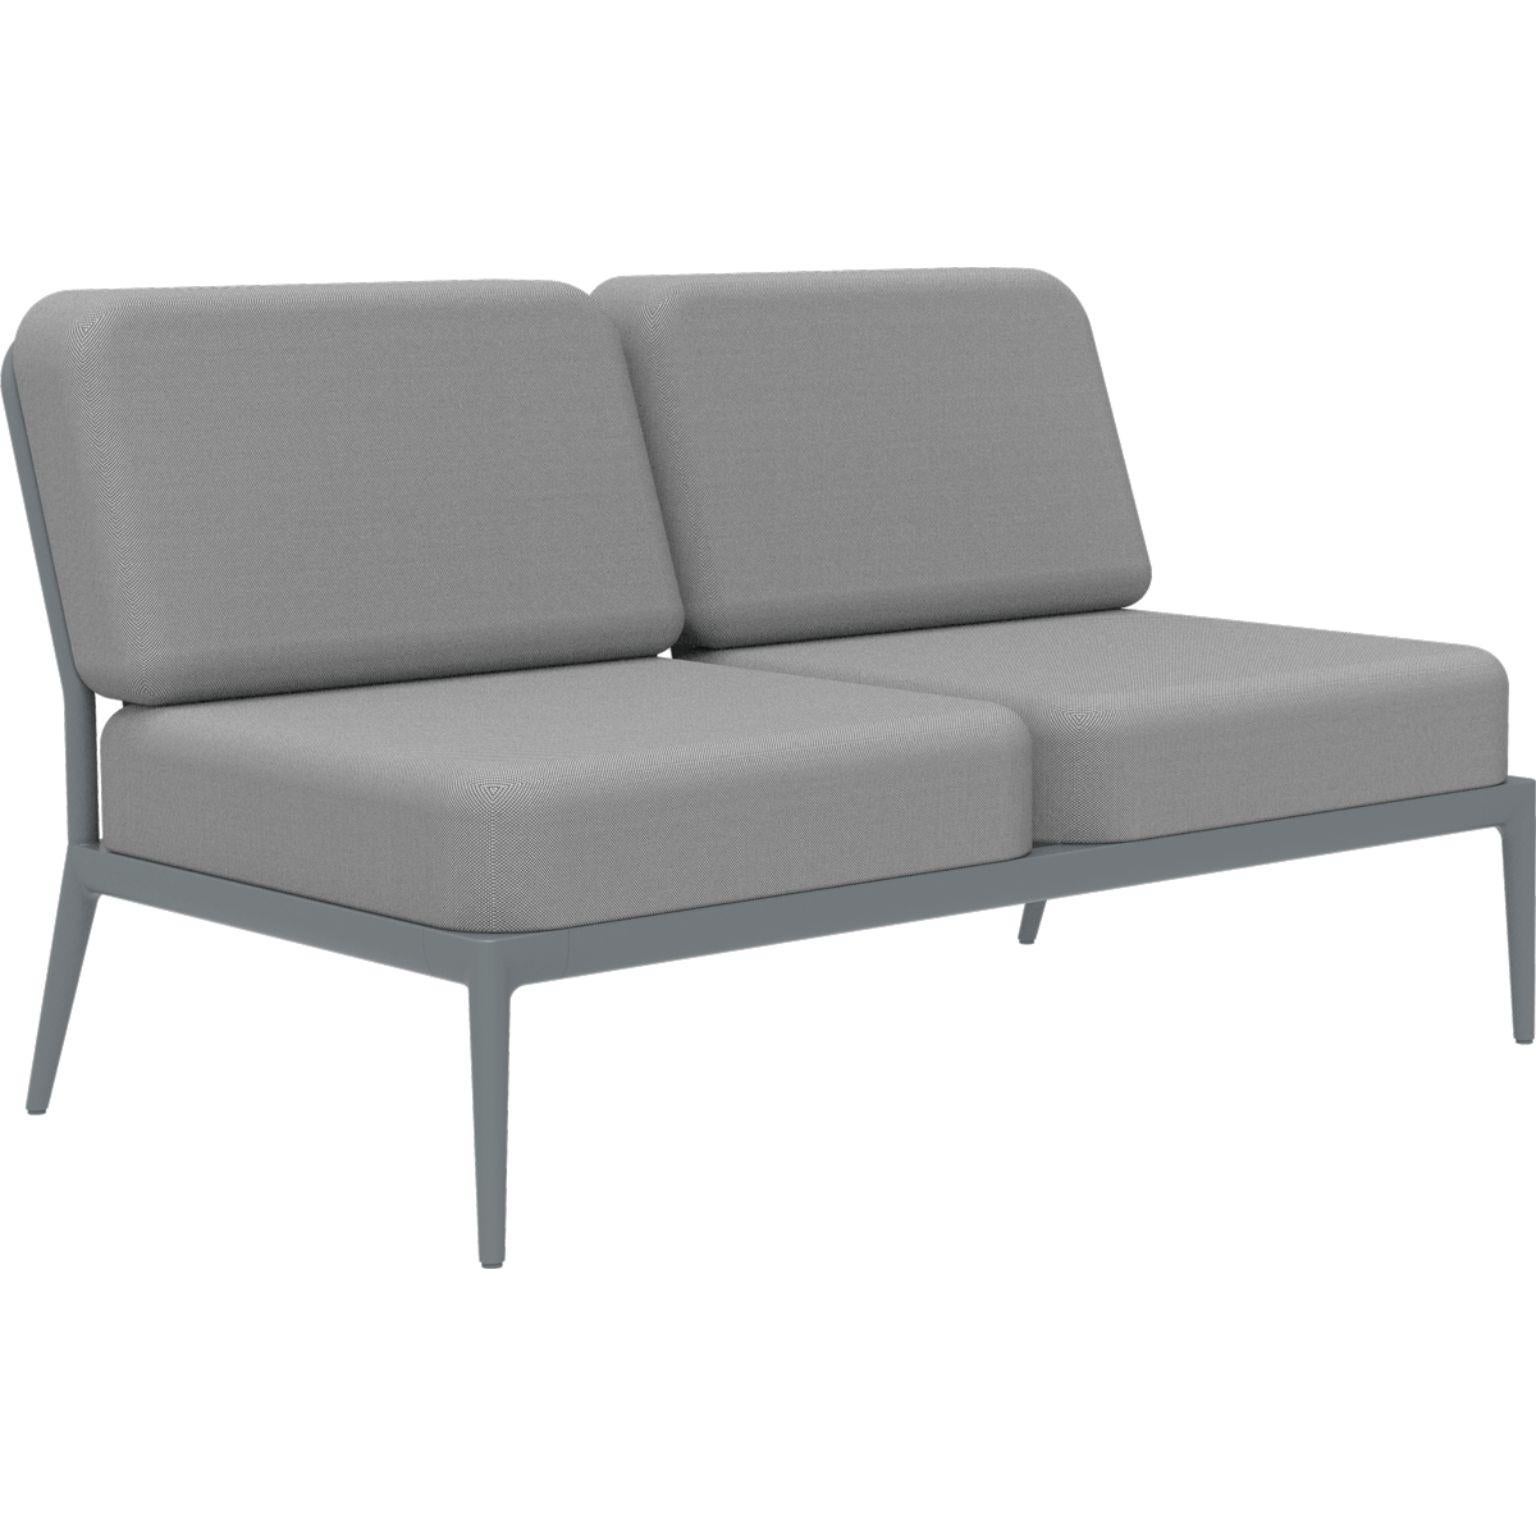 Ribbons grey double central modular sofa by MOWEE
Dimensions: D83 x W136 x H81 cm
Material: Aluminum, and upholstery.
Weight: 27 kg.
Also available in different colors and finishes. 

An unmistakable collection for its beauty and robustness. A